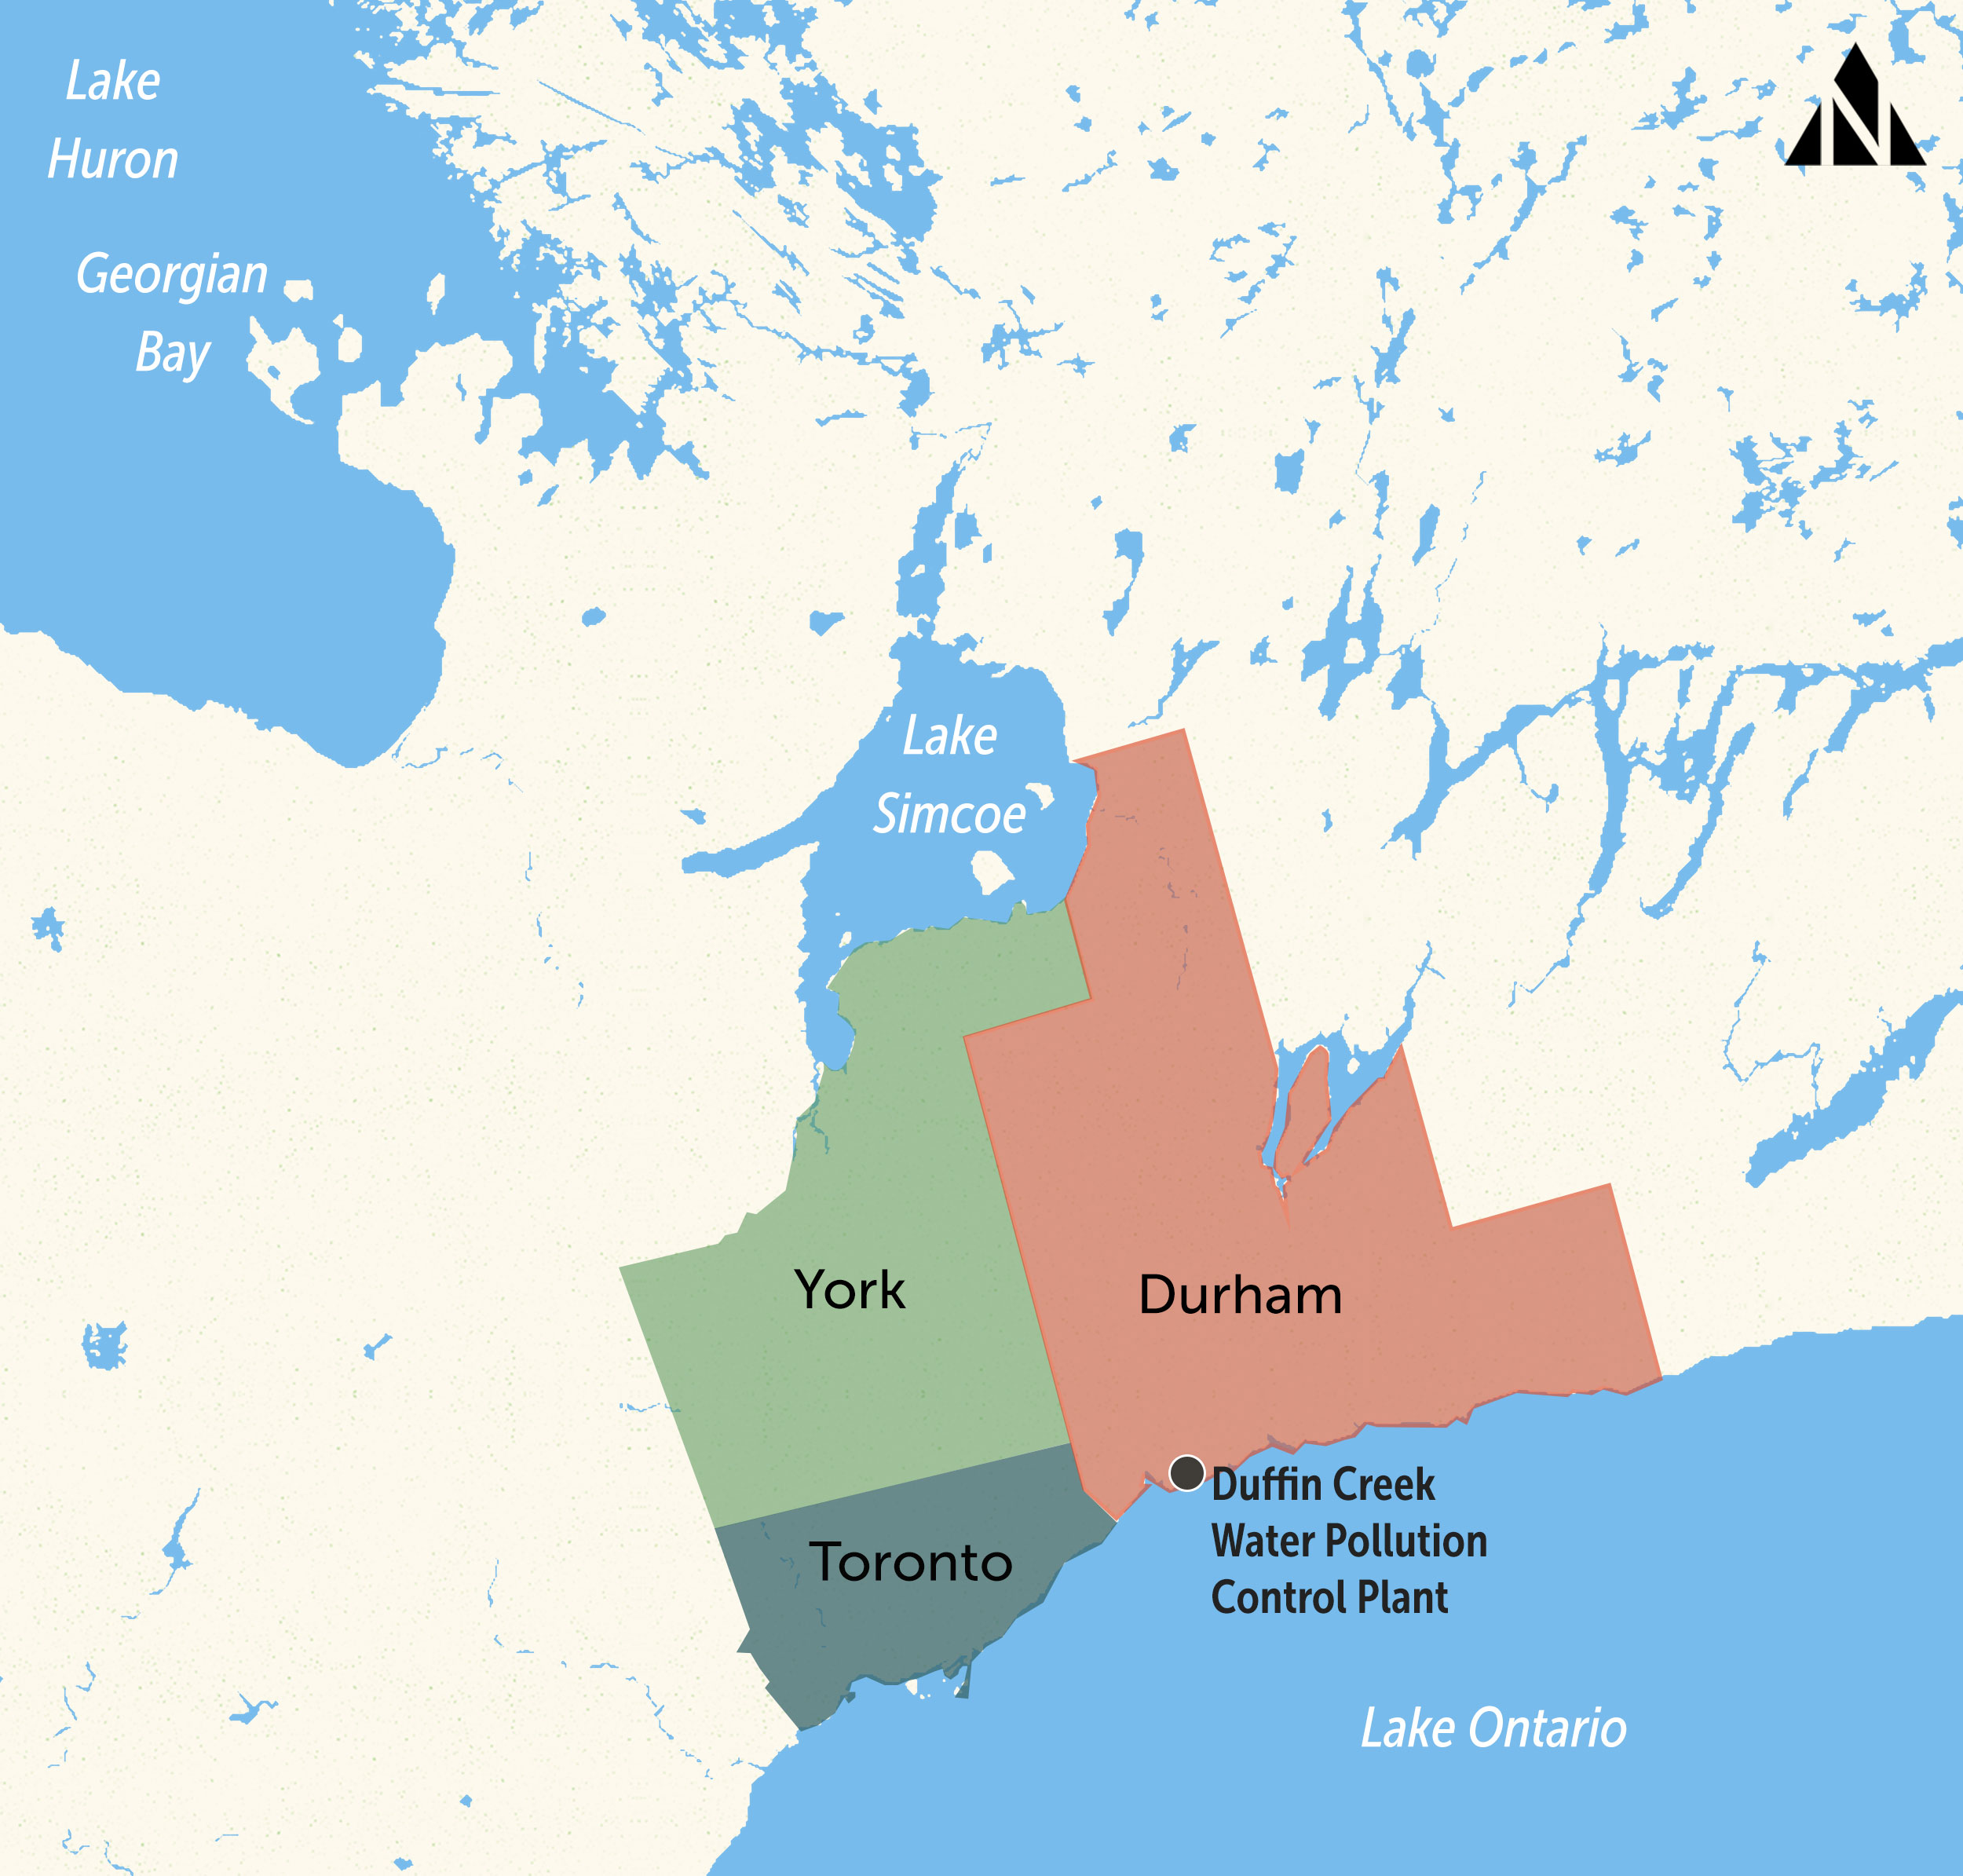 Map showing location of Duffin Creek Water Pollution Control Plant as well as York, Durham, and Toronto.